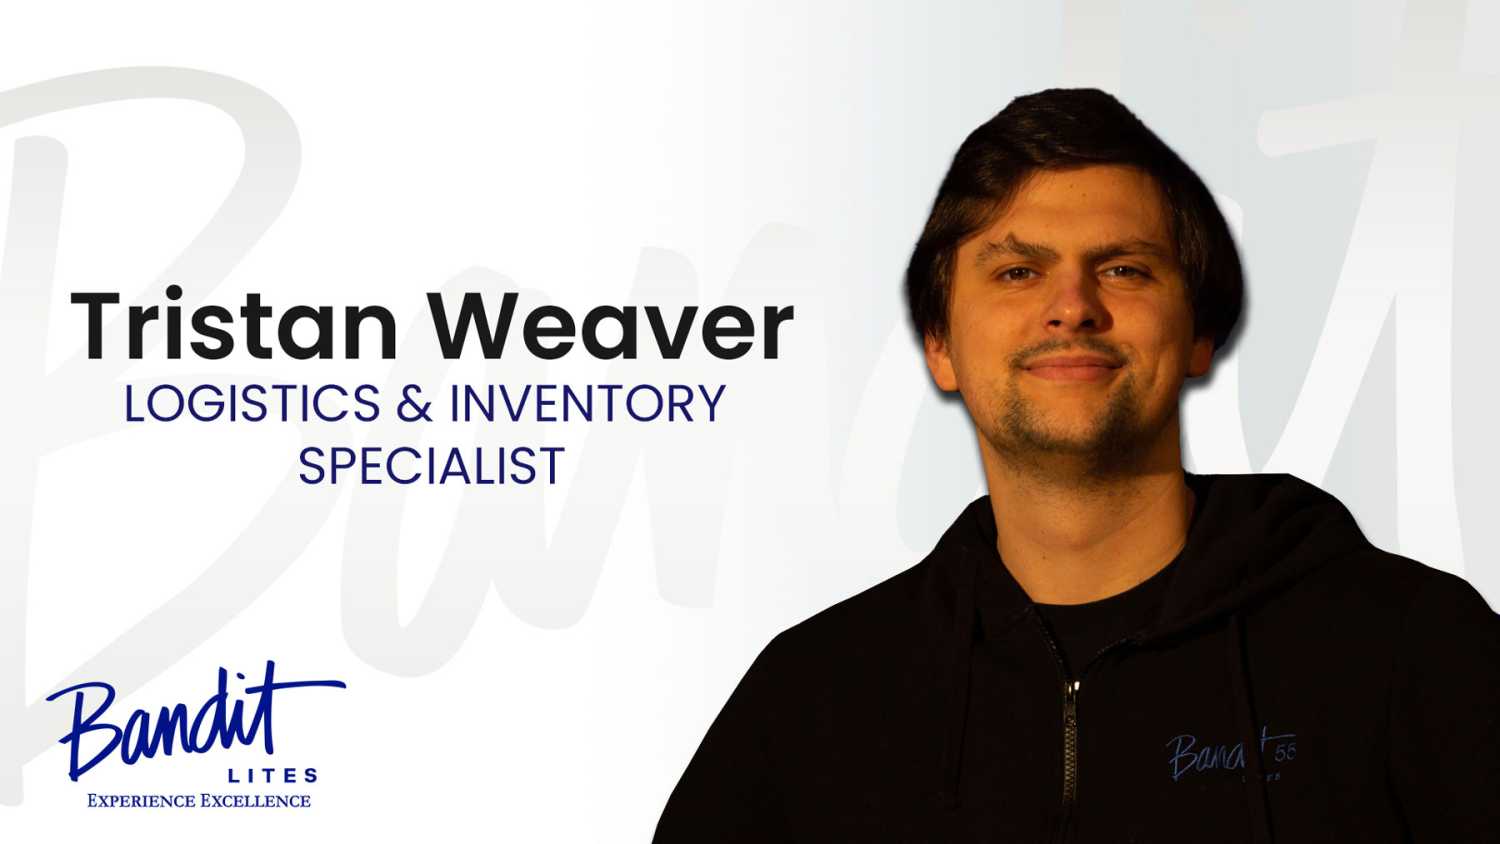 Tristan Weaver will assist in the daily operations of the Knoxville warehouse